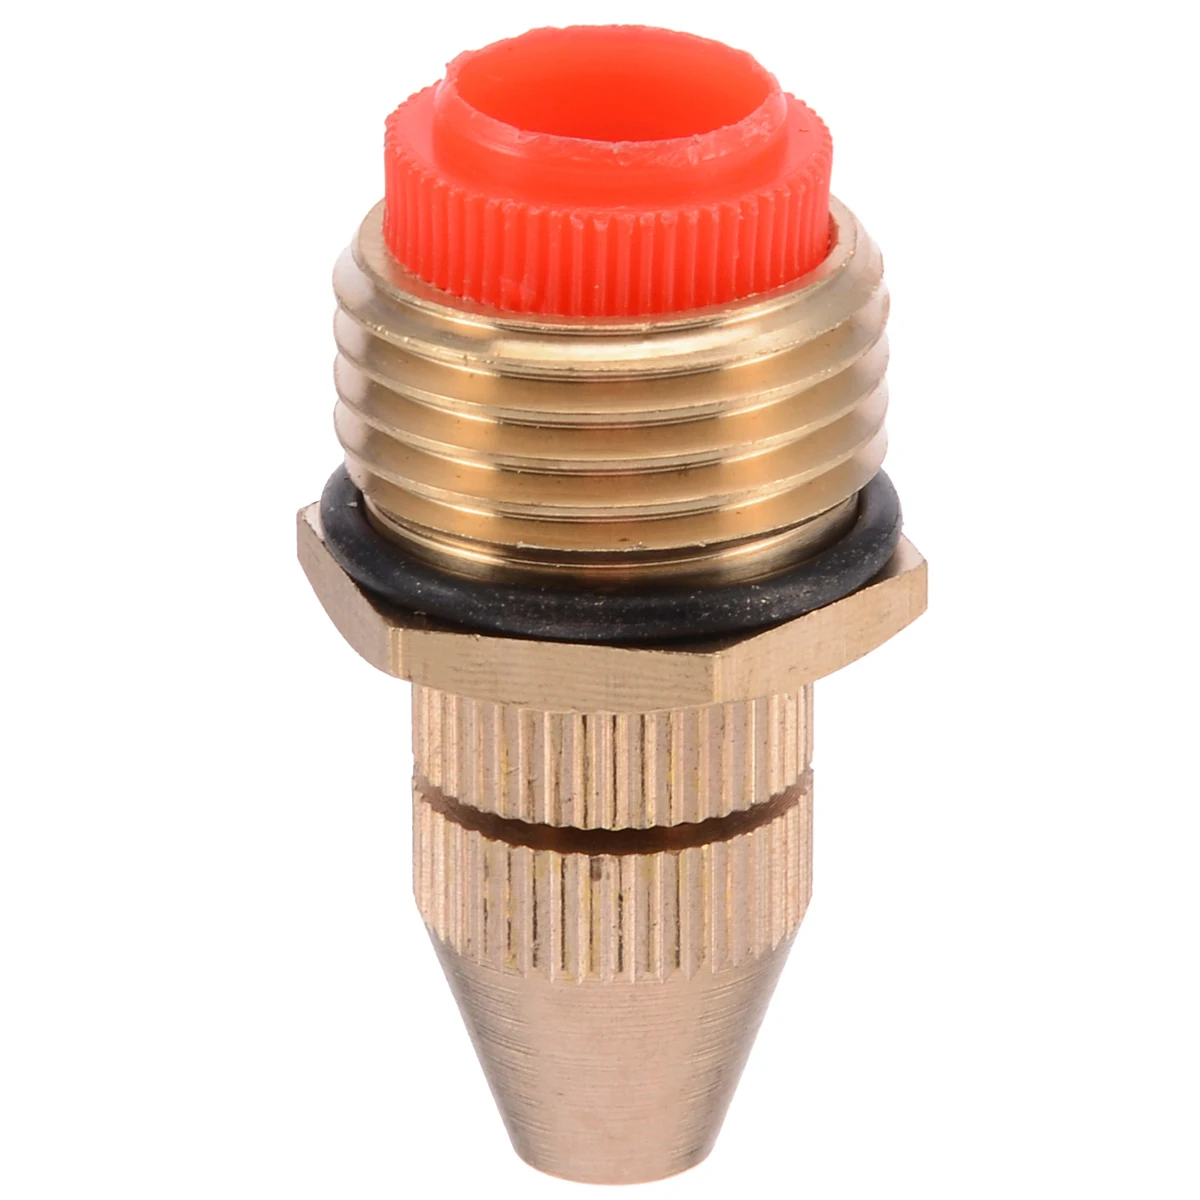 1Pcs 1/2 Inch Brass Adjustable Sprinkler Garden Lawn Irrigation Atomizing Water Spray Nozzle Tools Accessories  Дом и